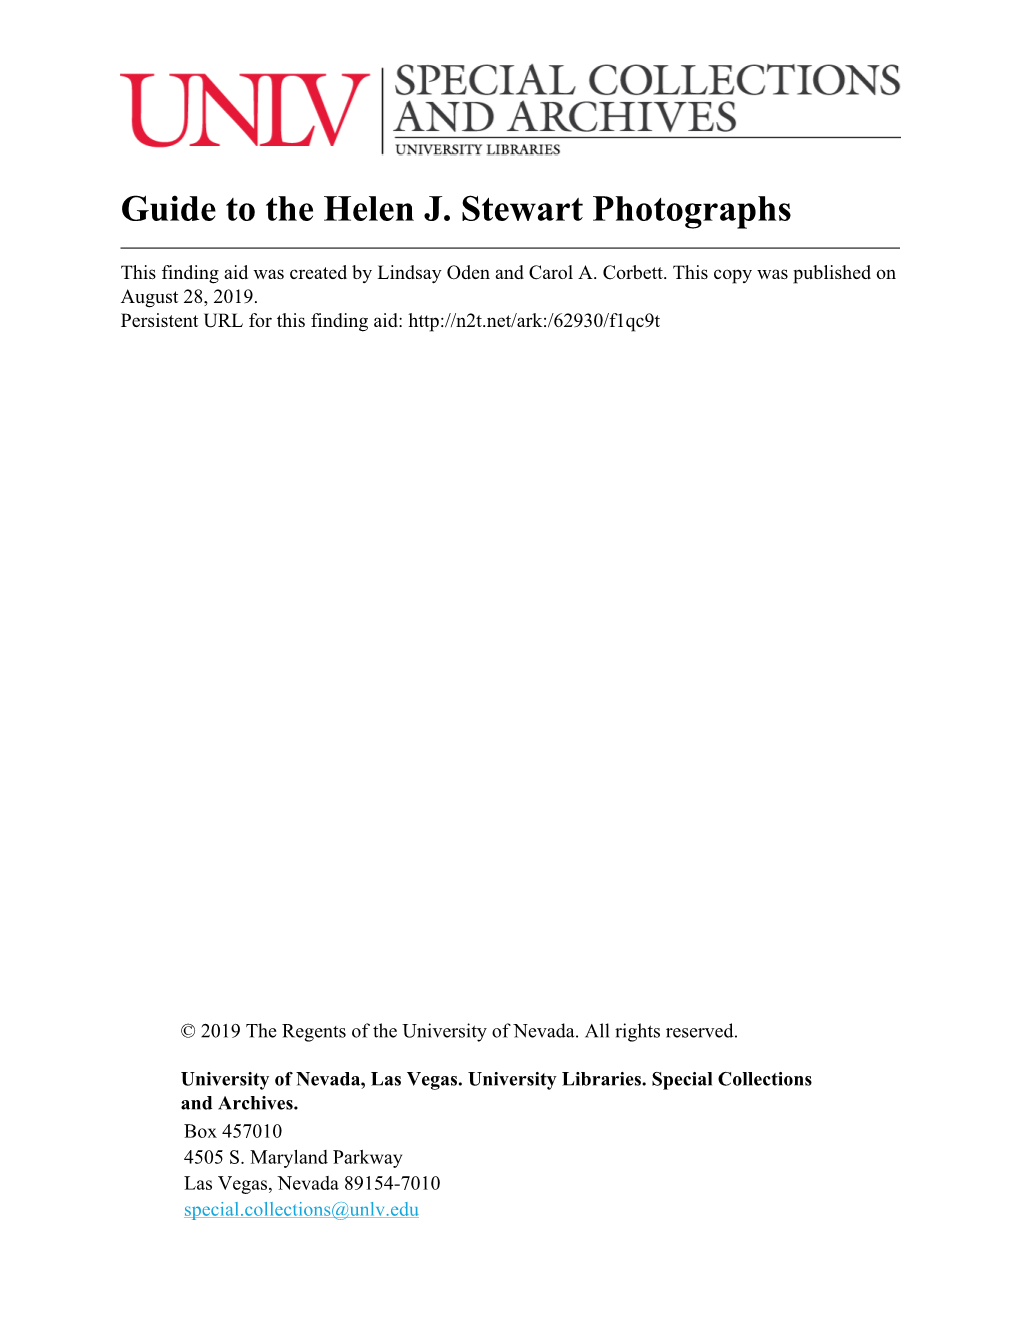 Guide to the Helen J. Stewart Photographs